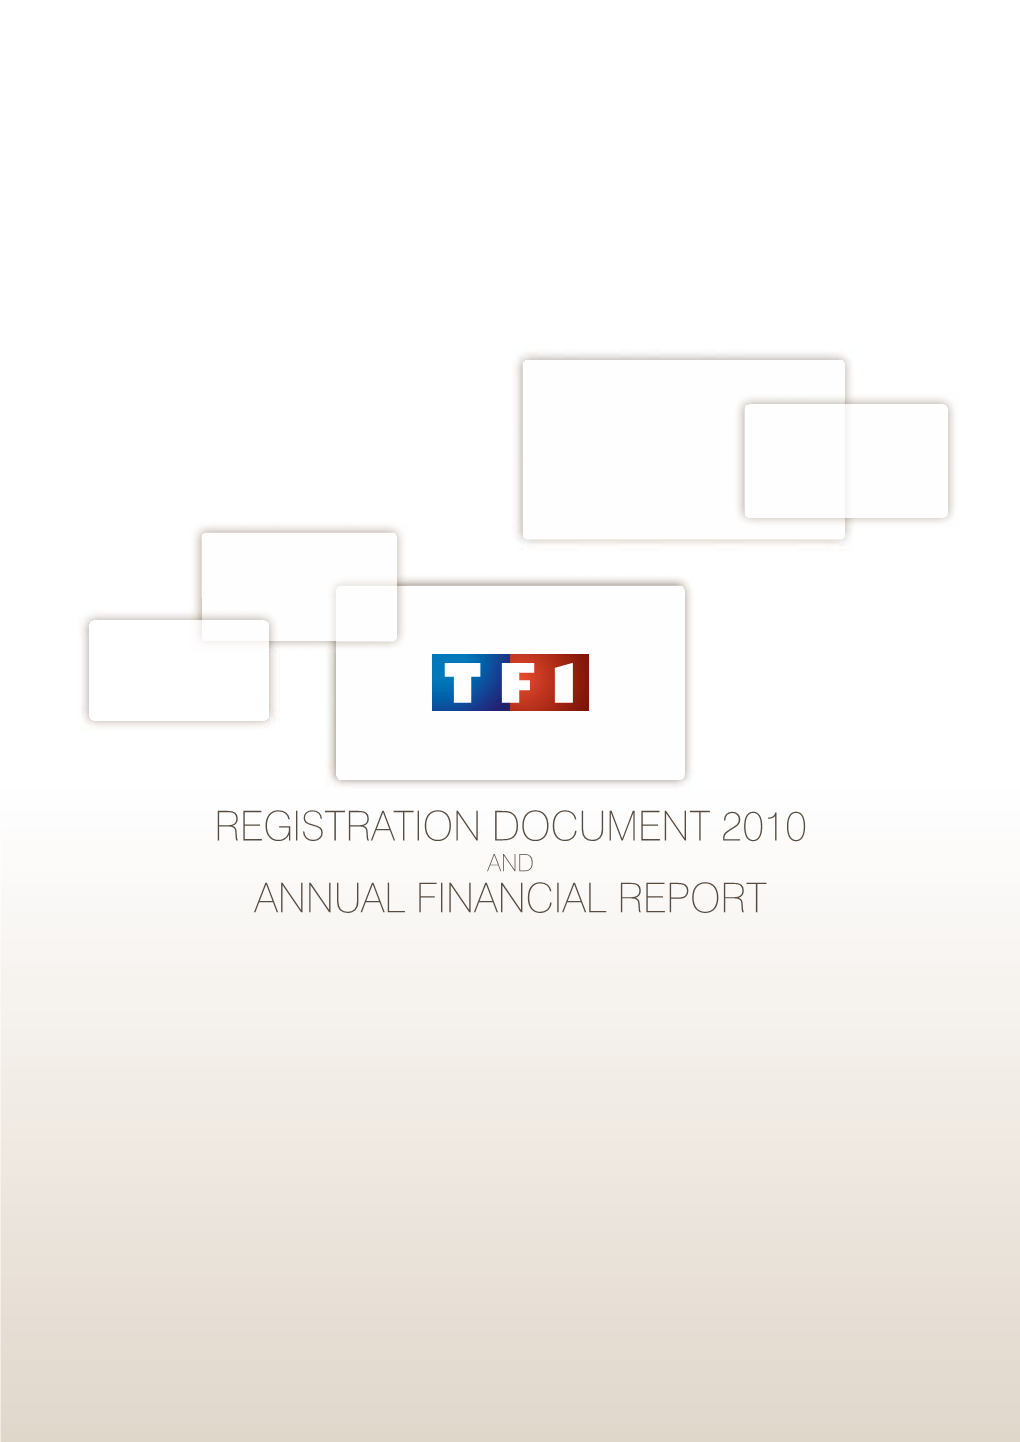 Registration Document 2010 Annual Financial Report